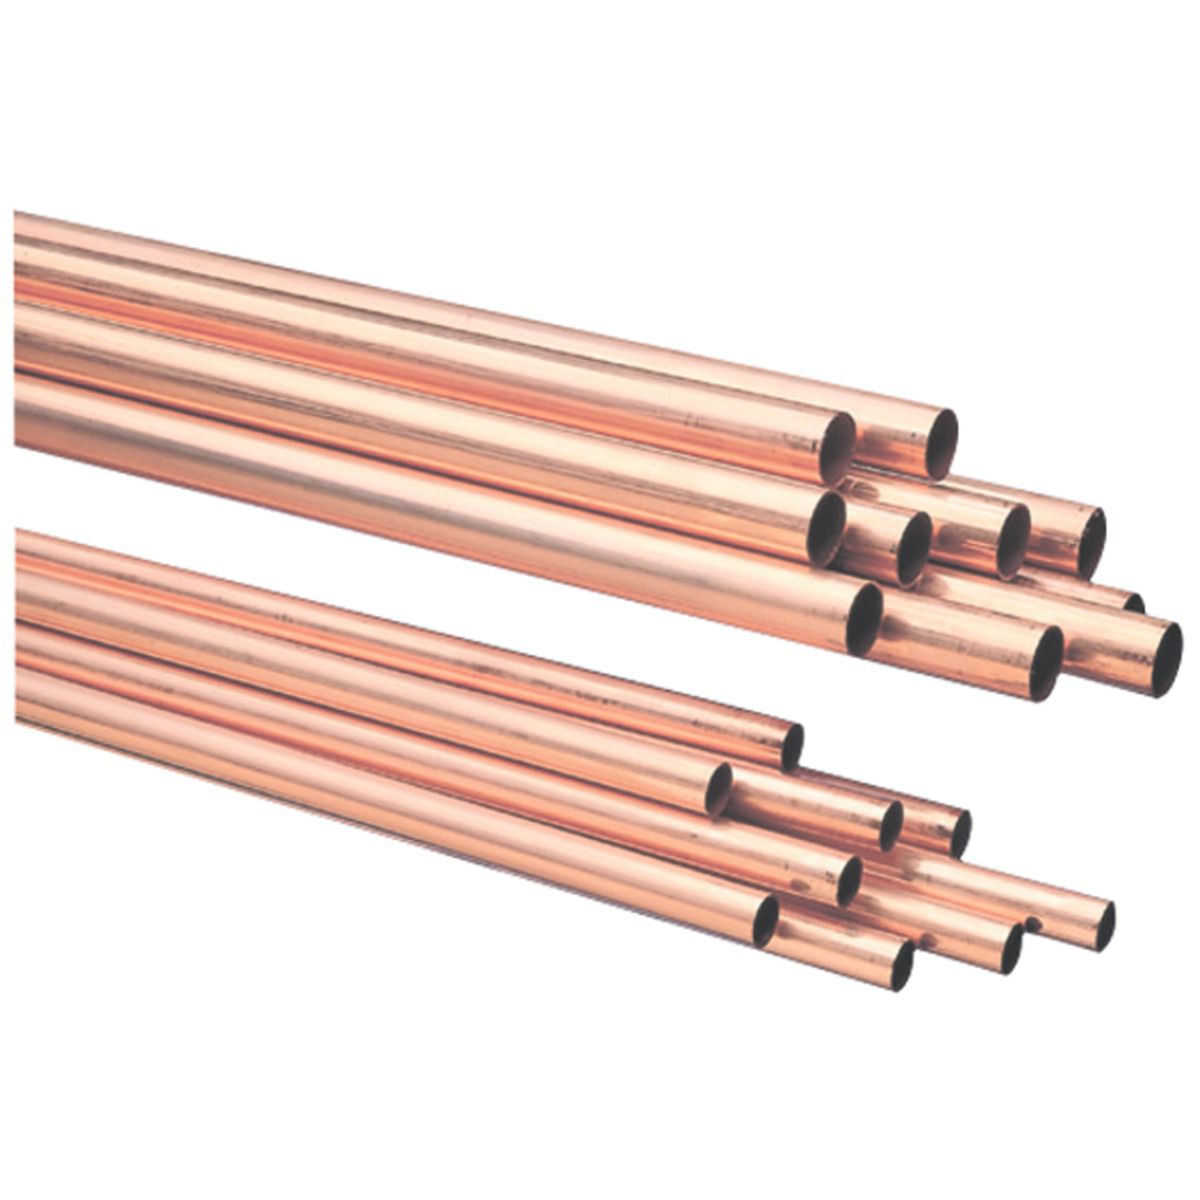 Image of Wednesbury Copper Pipe 15mm x 2m Pack 10